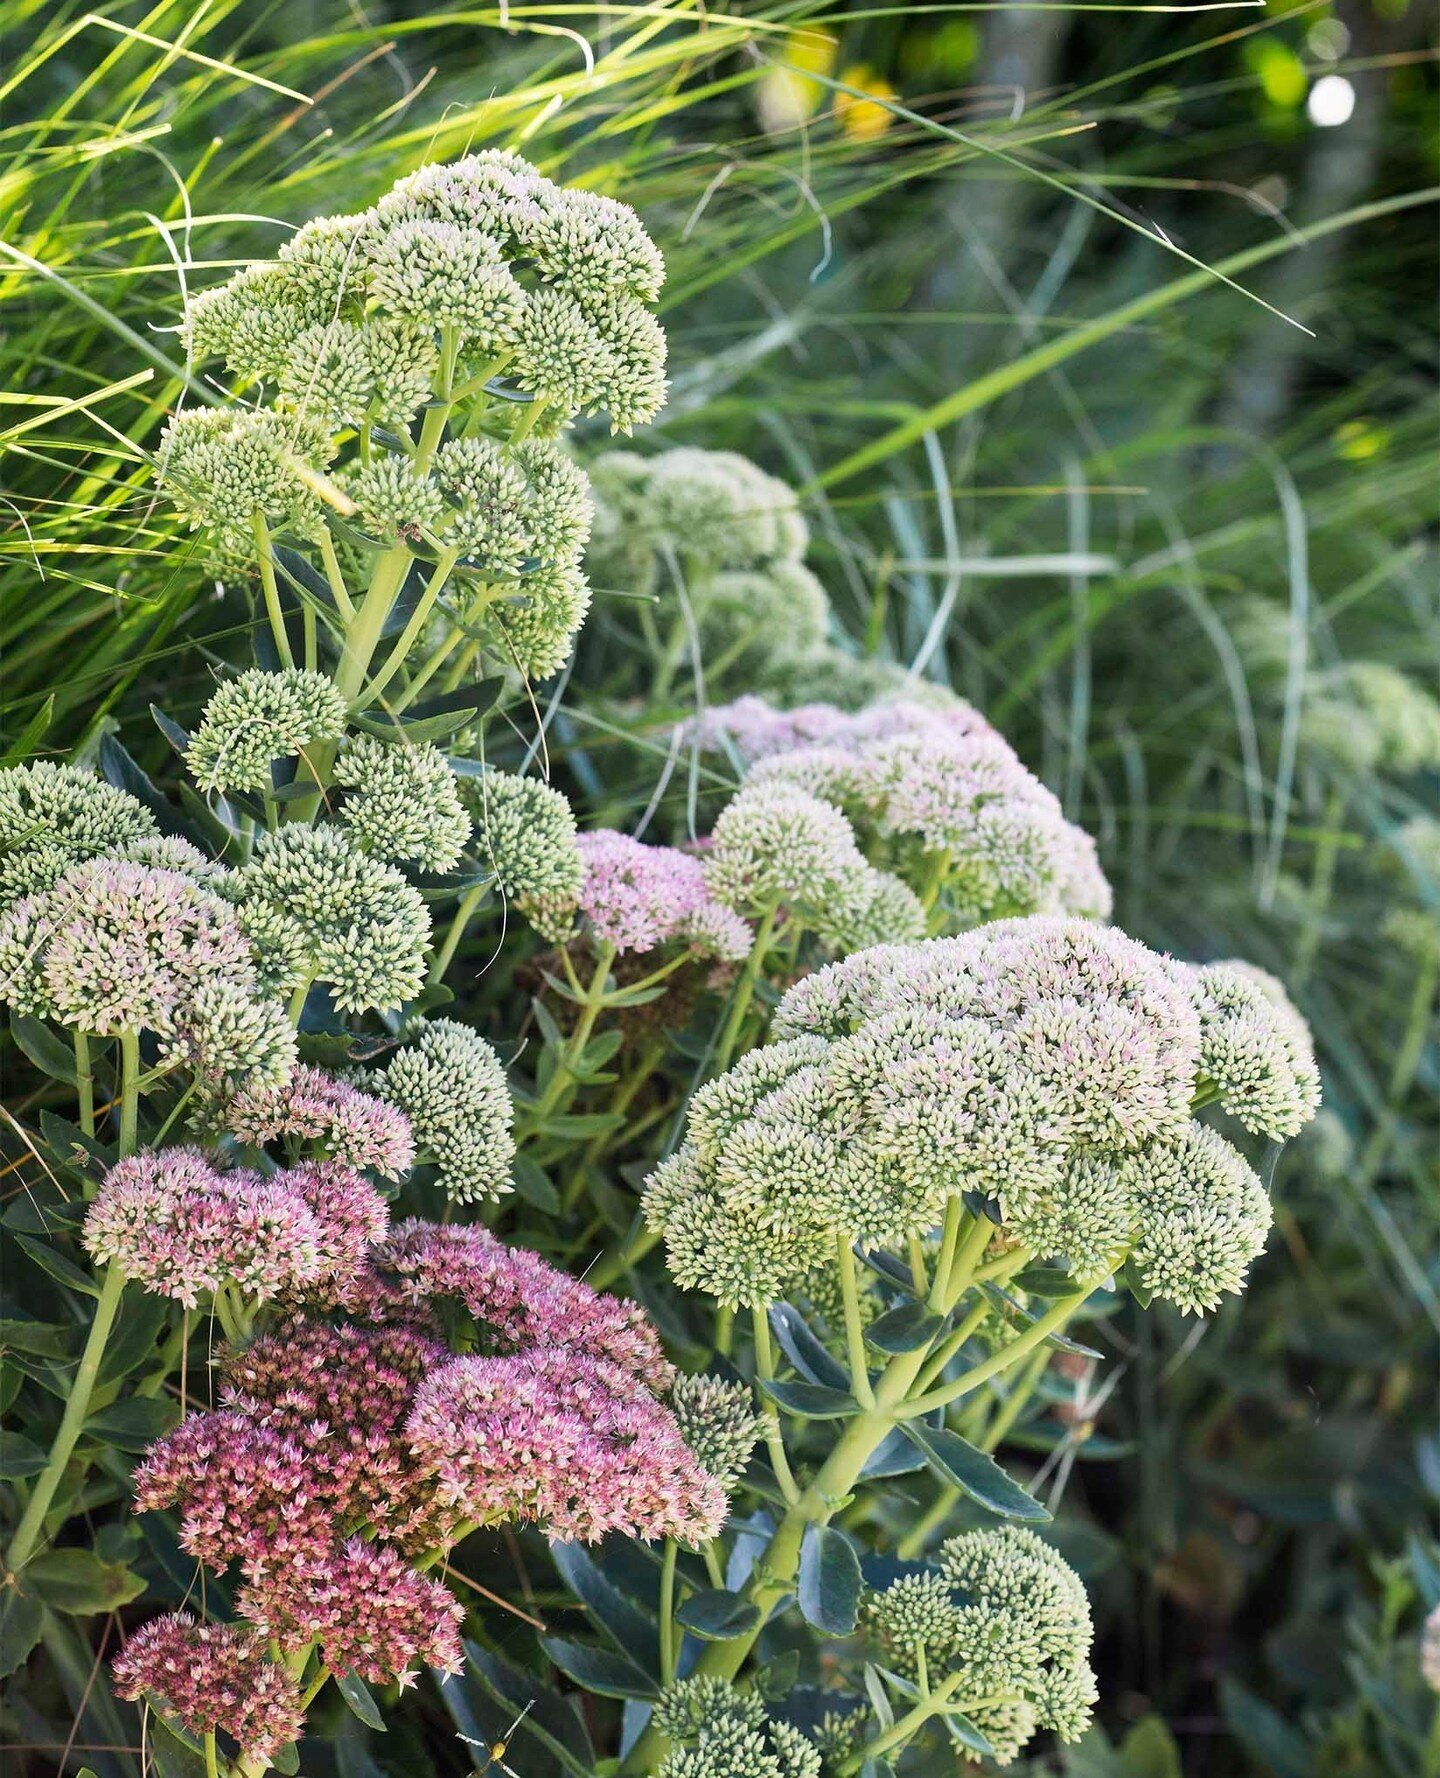 Autumn Joy stonecrop - Hylotelephium telephium 'Herbstfreude' ('Autumn Joy'), also know commonly as sedum.  This is a hybrid in beautiful grey-green colours that flower in summer with deep pink, star-shaped flowers that grow in clusters.⁠
⁠
🍃 #linki